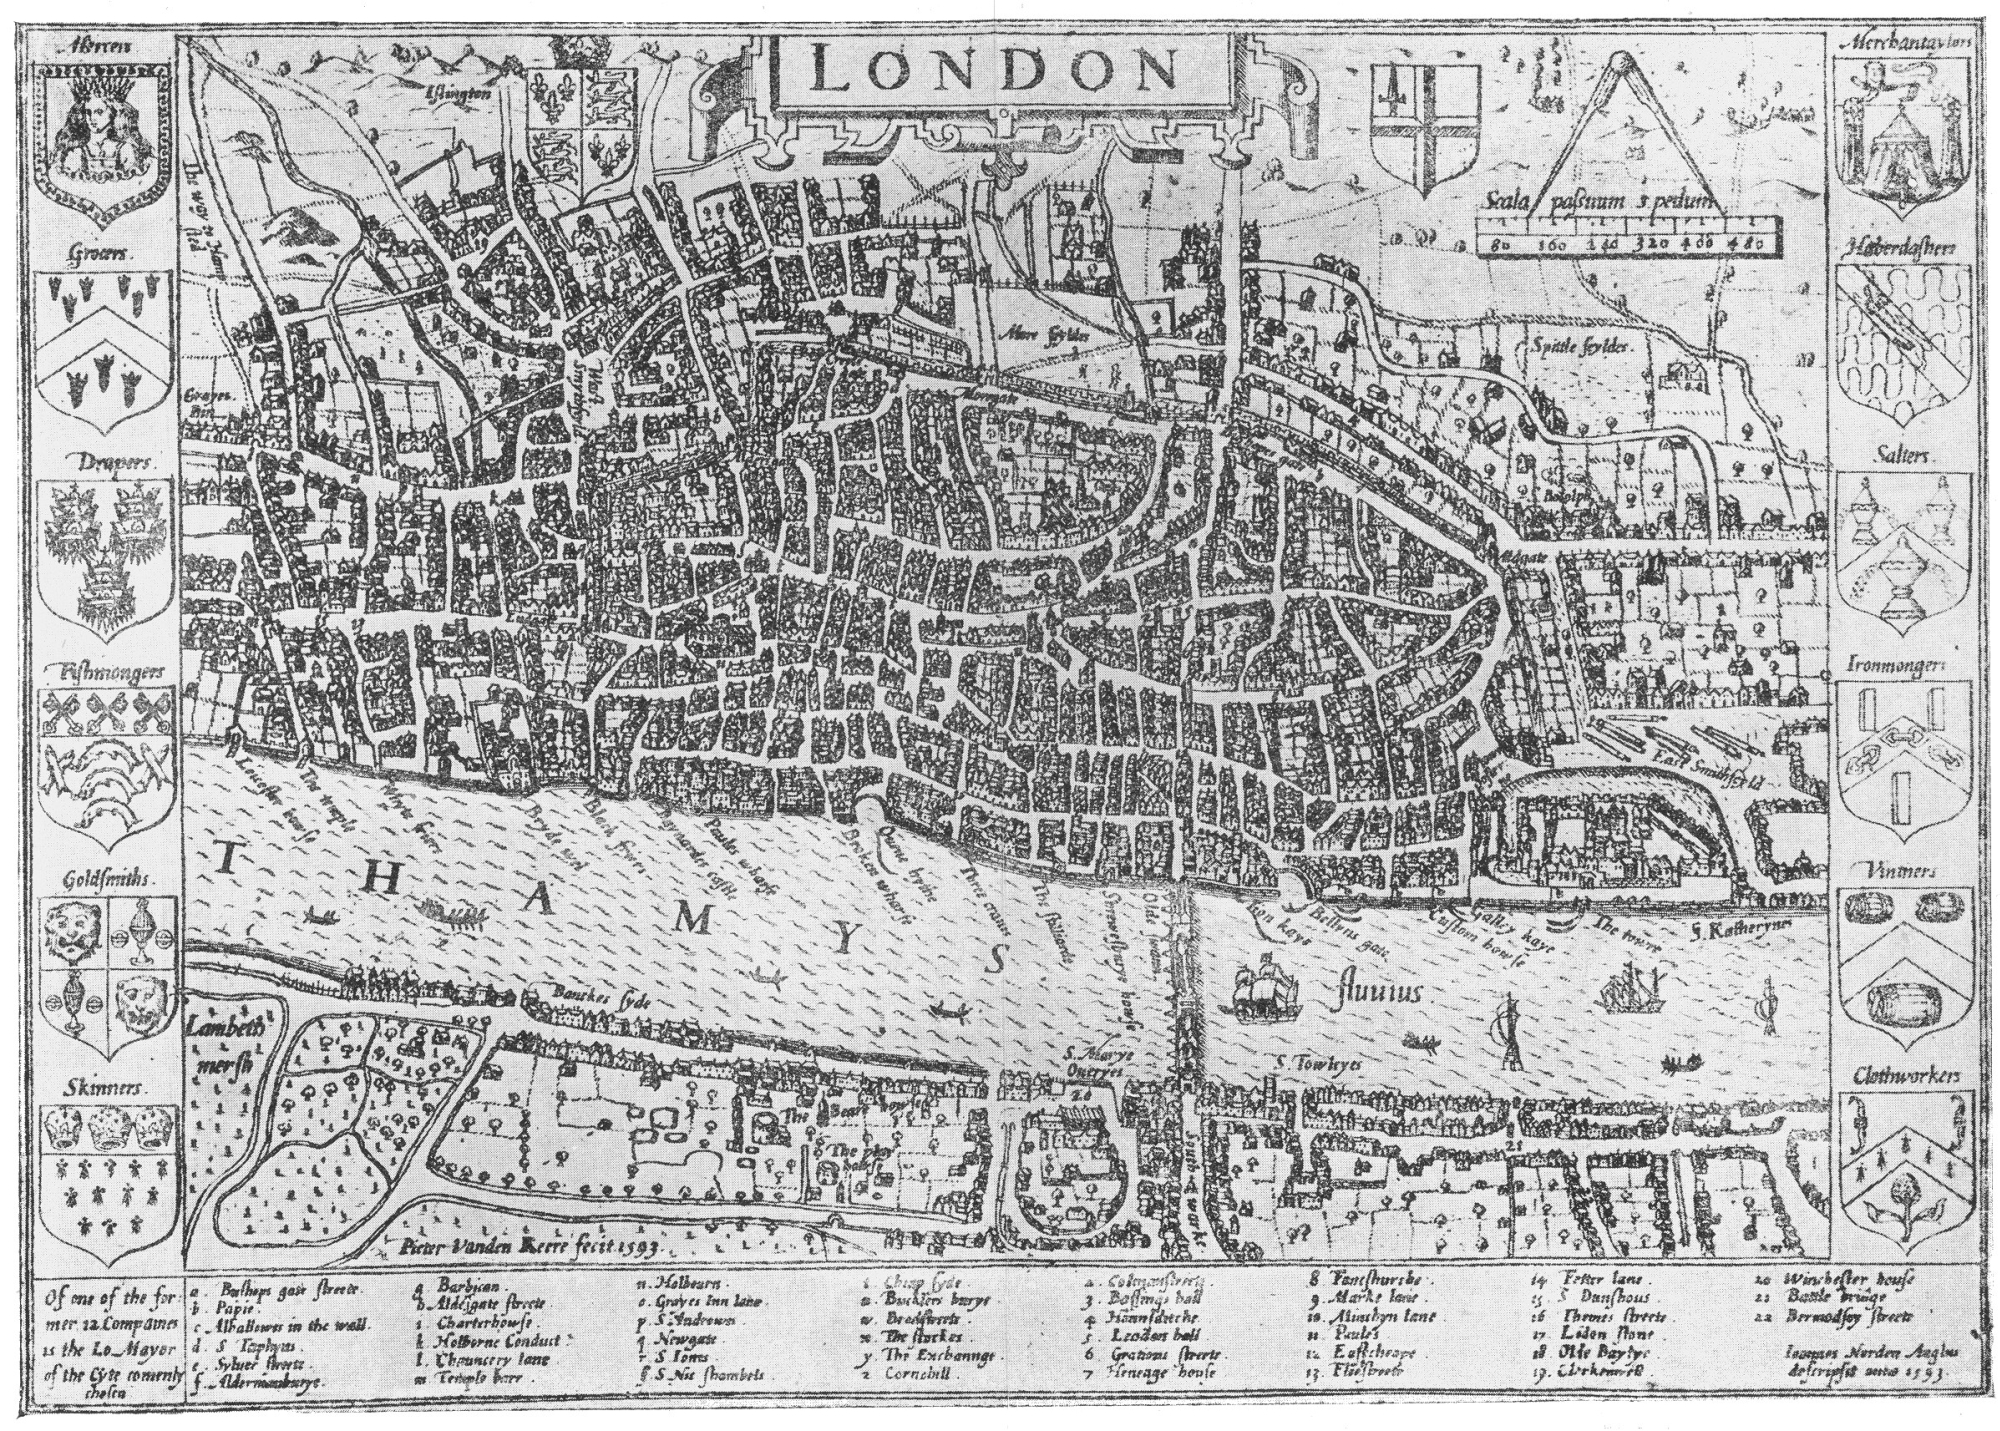 The Project Gutenberg eBook of the Story of London, by Henry B. Wheatley.